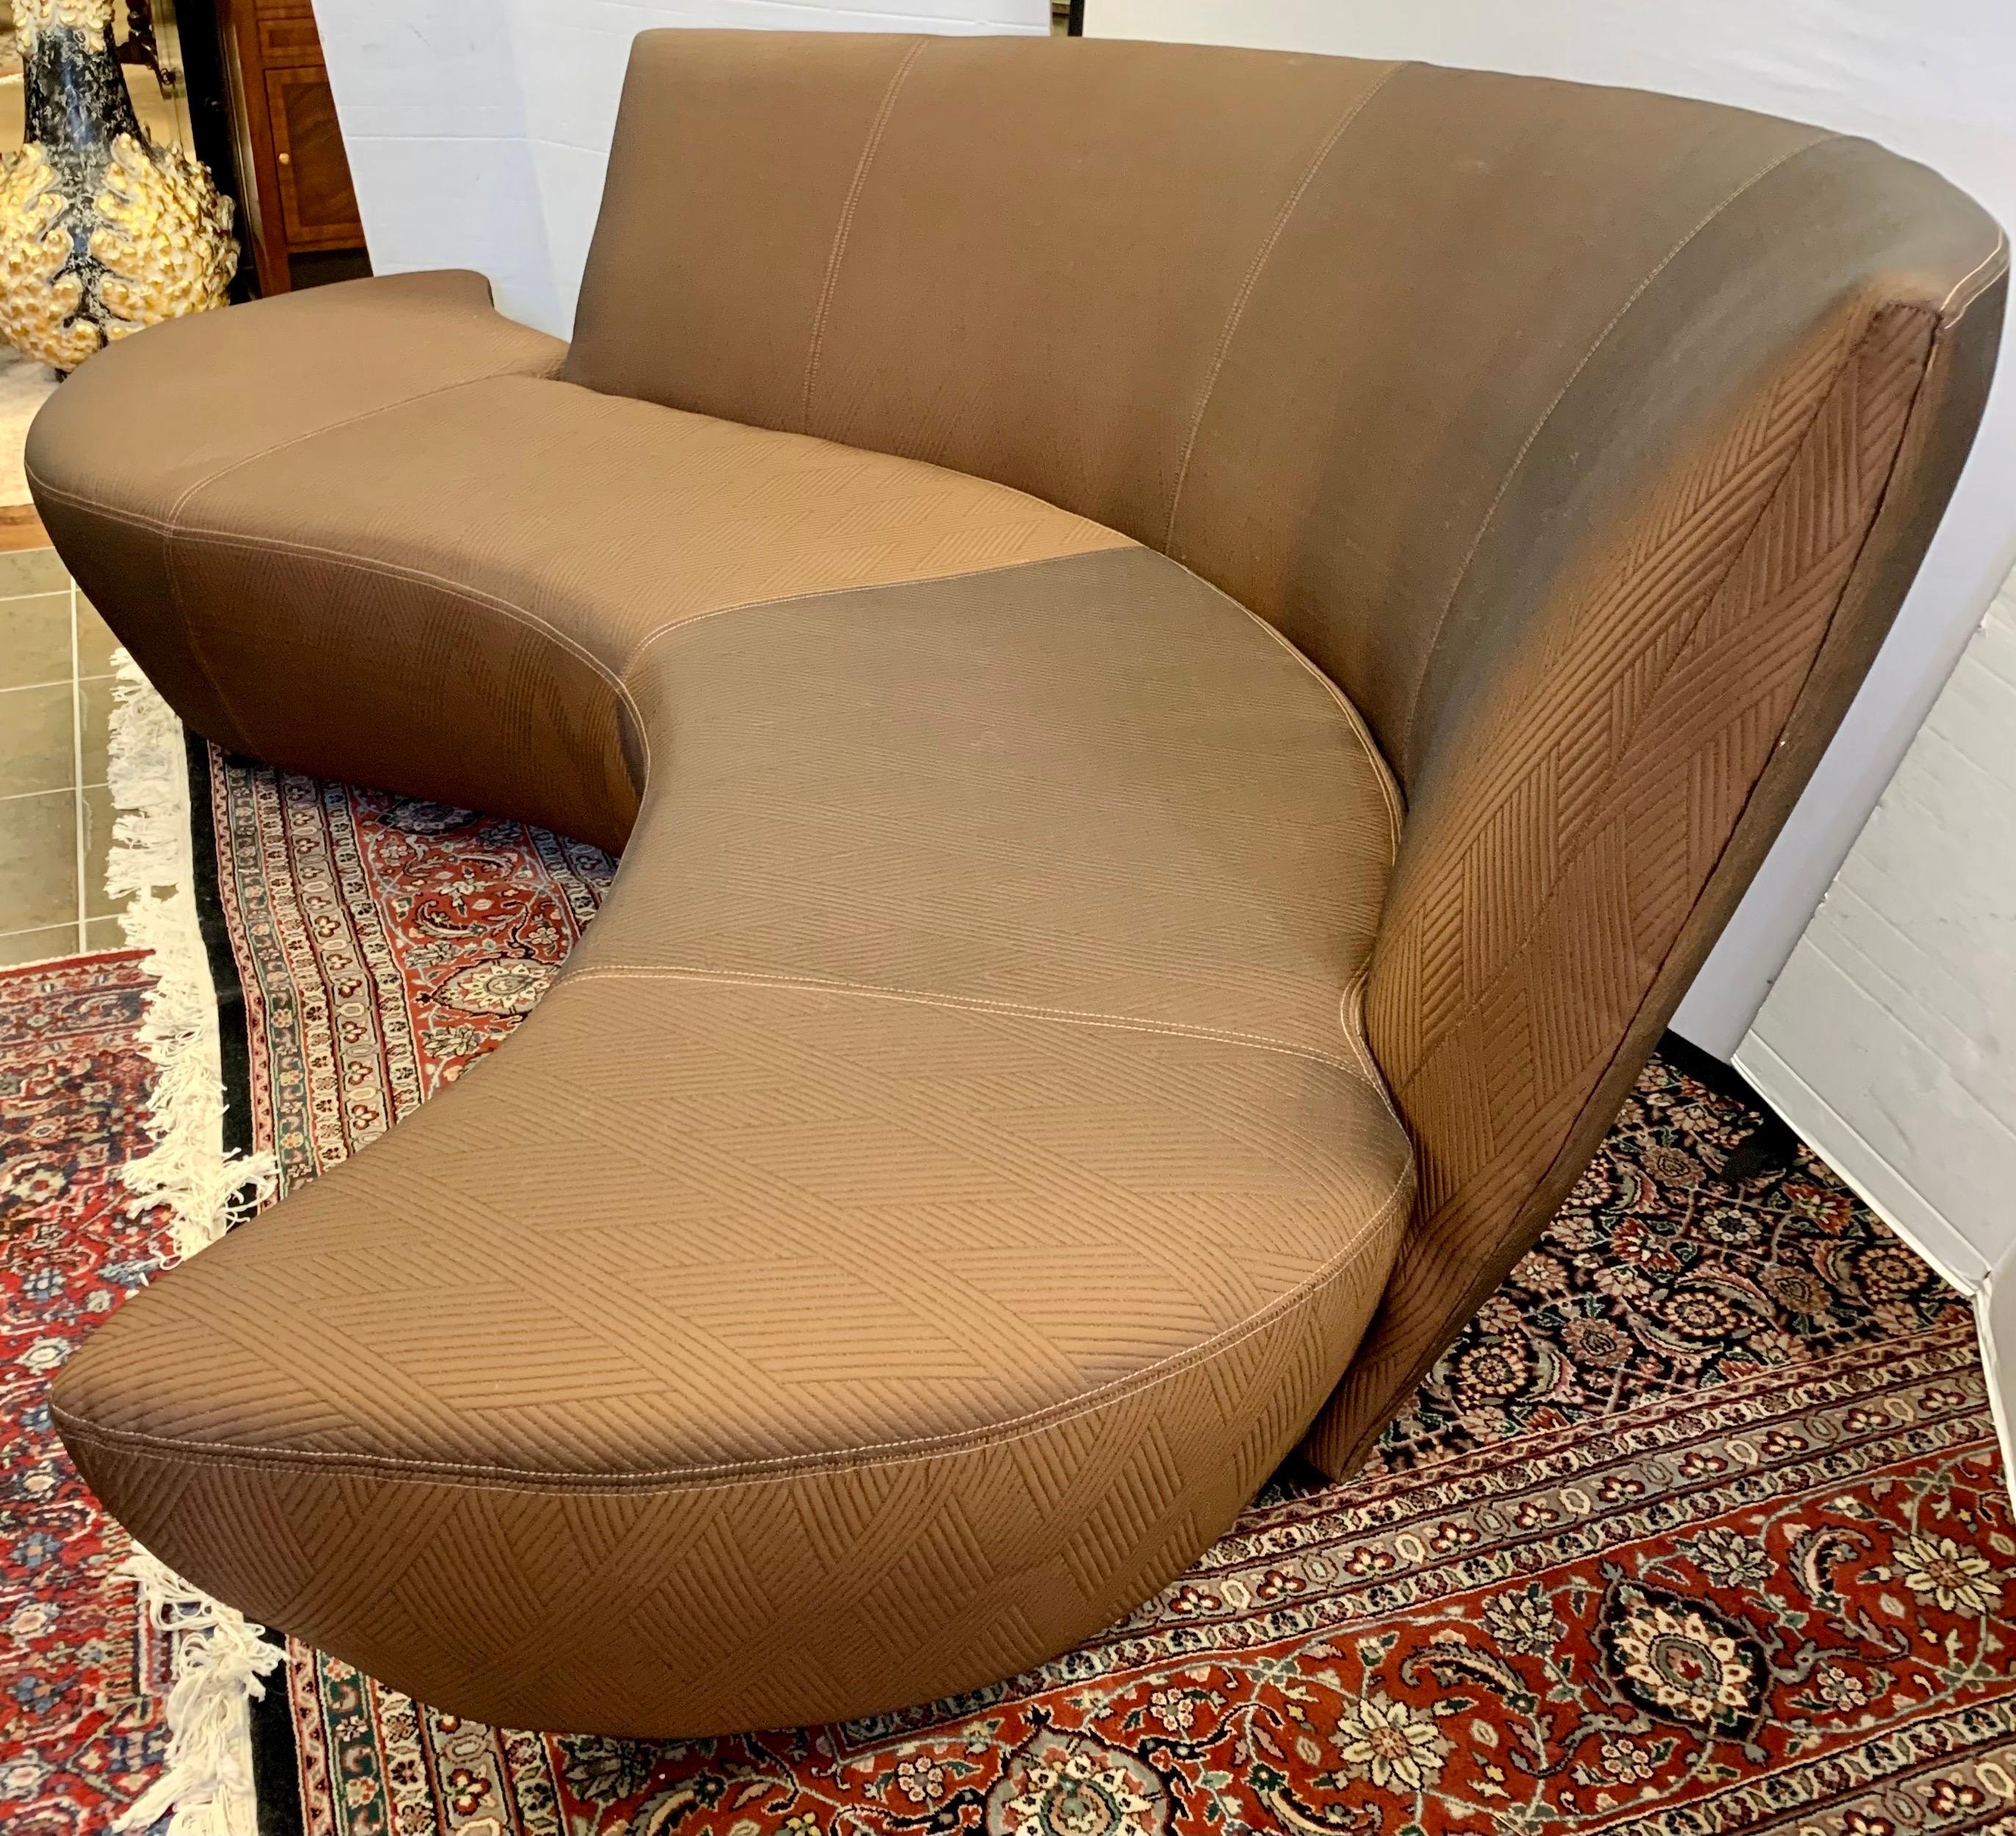 A sculptural modern sofa designed by Vladimir Kagan and inspired by the curves and undulations of the Guggenheim Museum in Bilbao, Spain. It has newer upholstery done in the last few years and is stunning. Rare to see a serpentine Kagan sofa in such